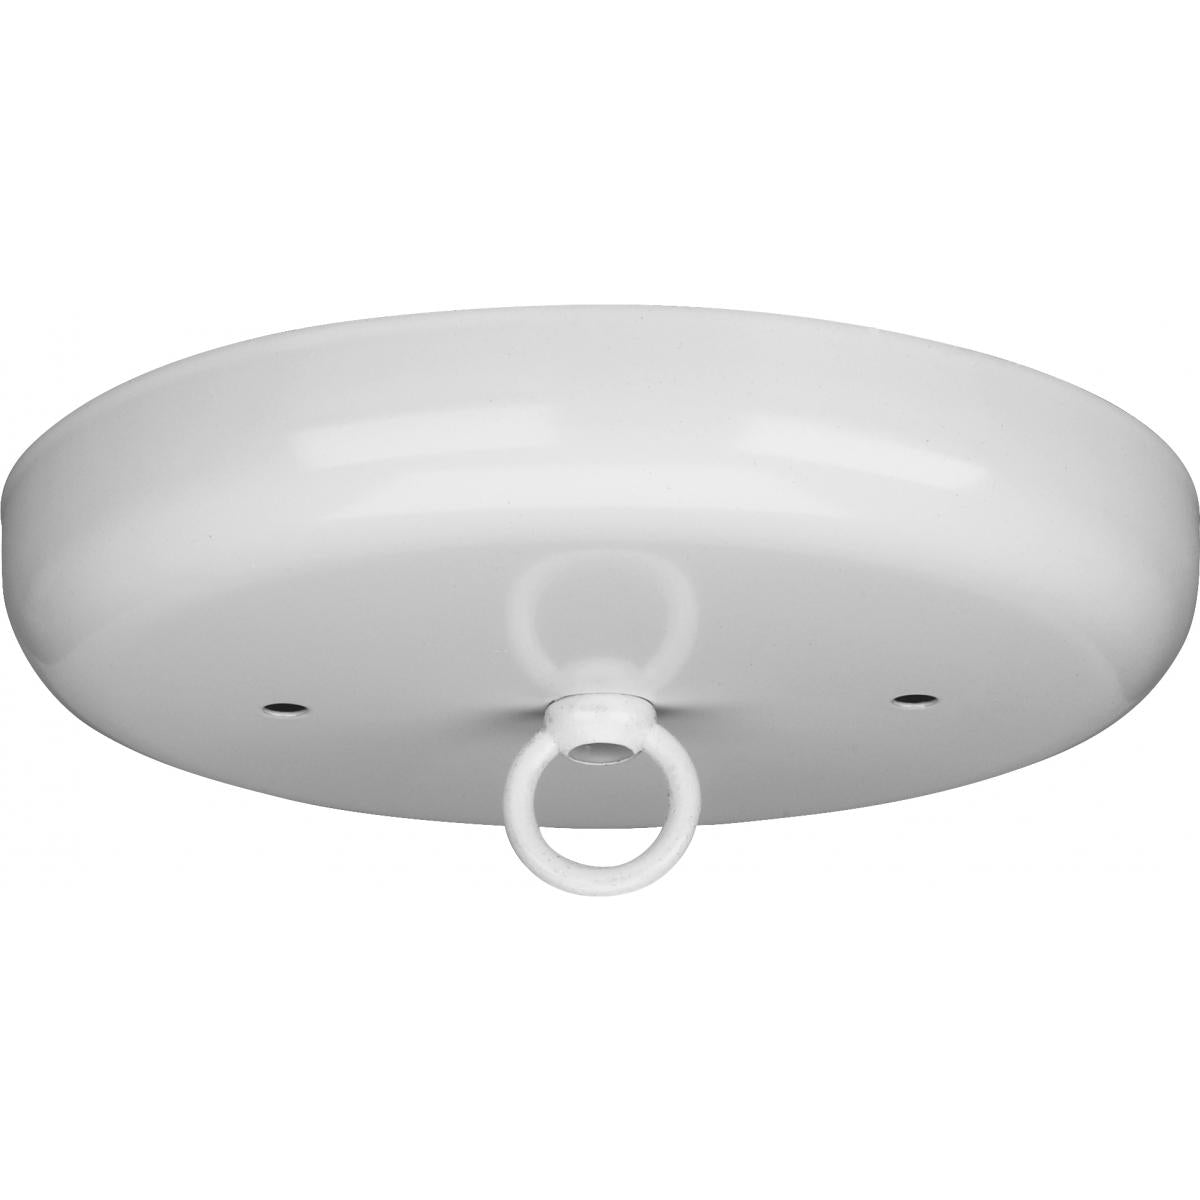 Satco 90-894 Contemporary Canopy Kit White Finish 5" Diameter 7/16" Center Hole 2-8/32 Bar Holes Includes Hardware 10lbs Max